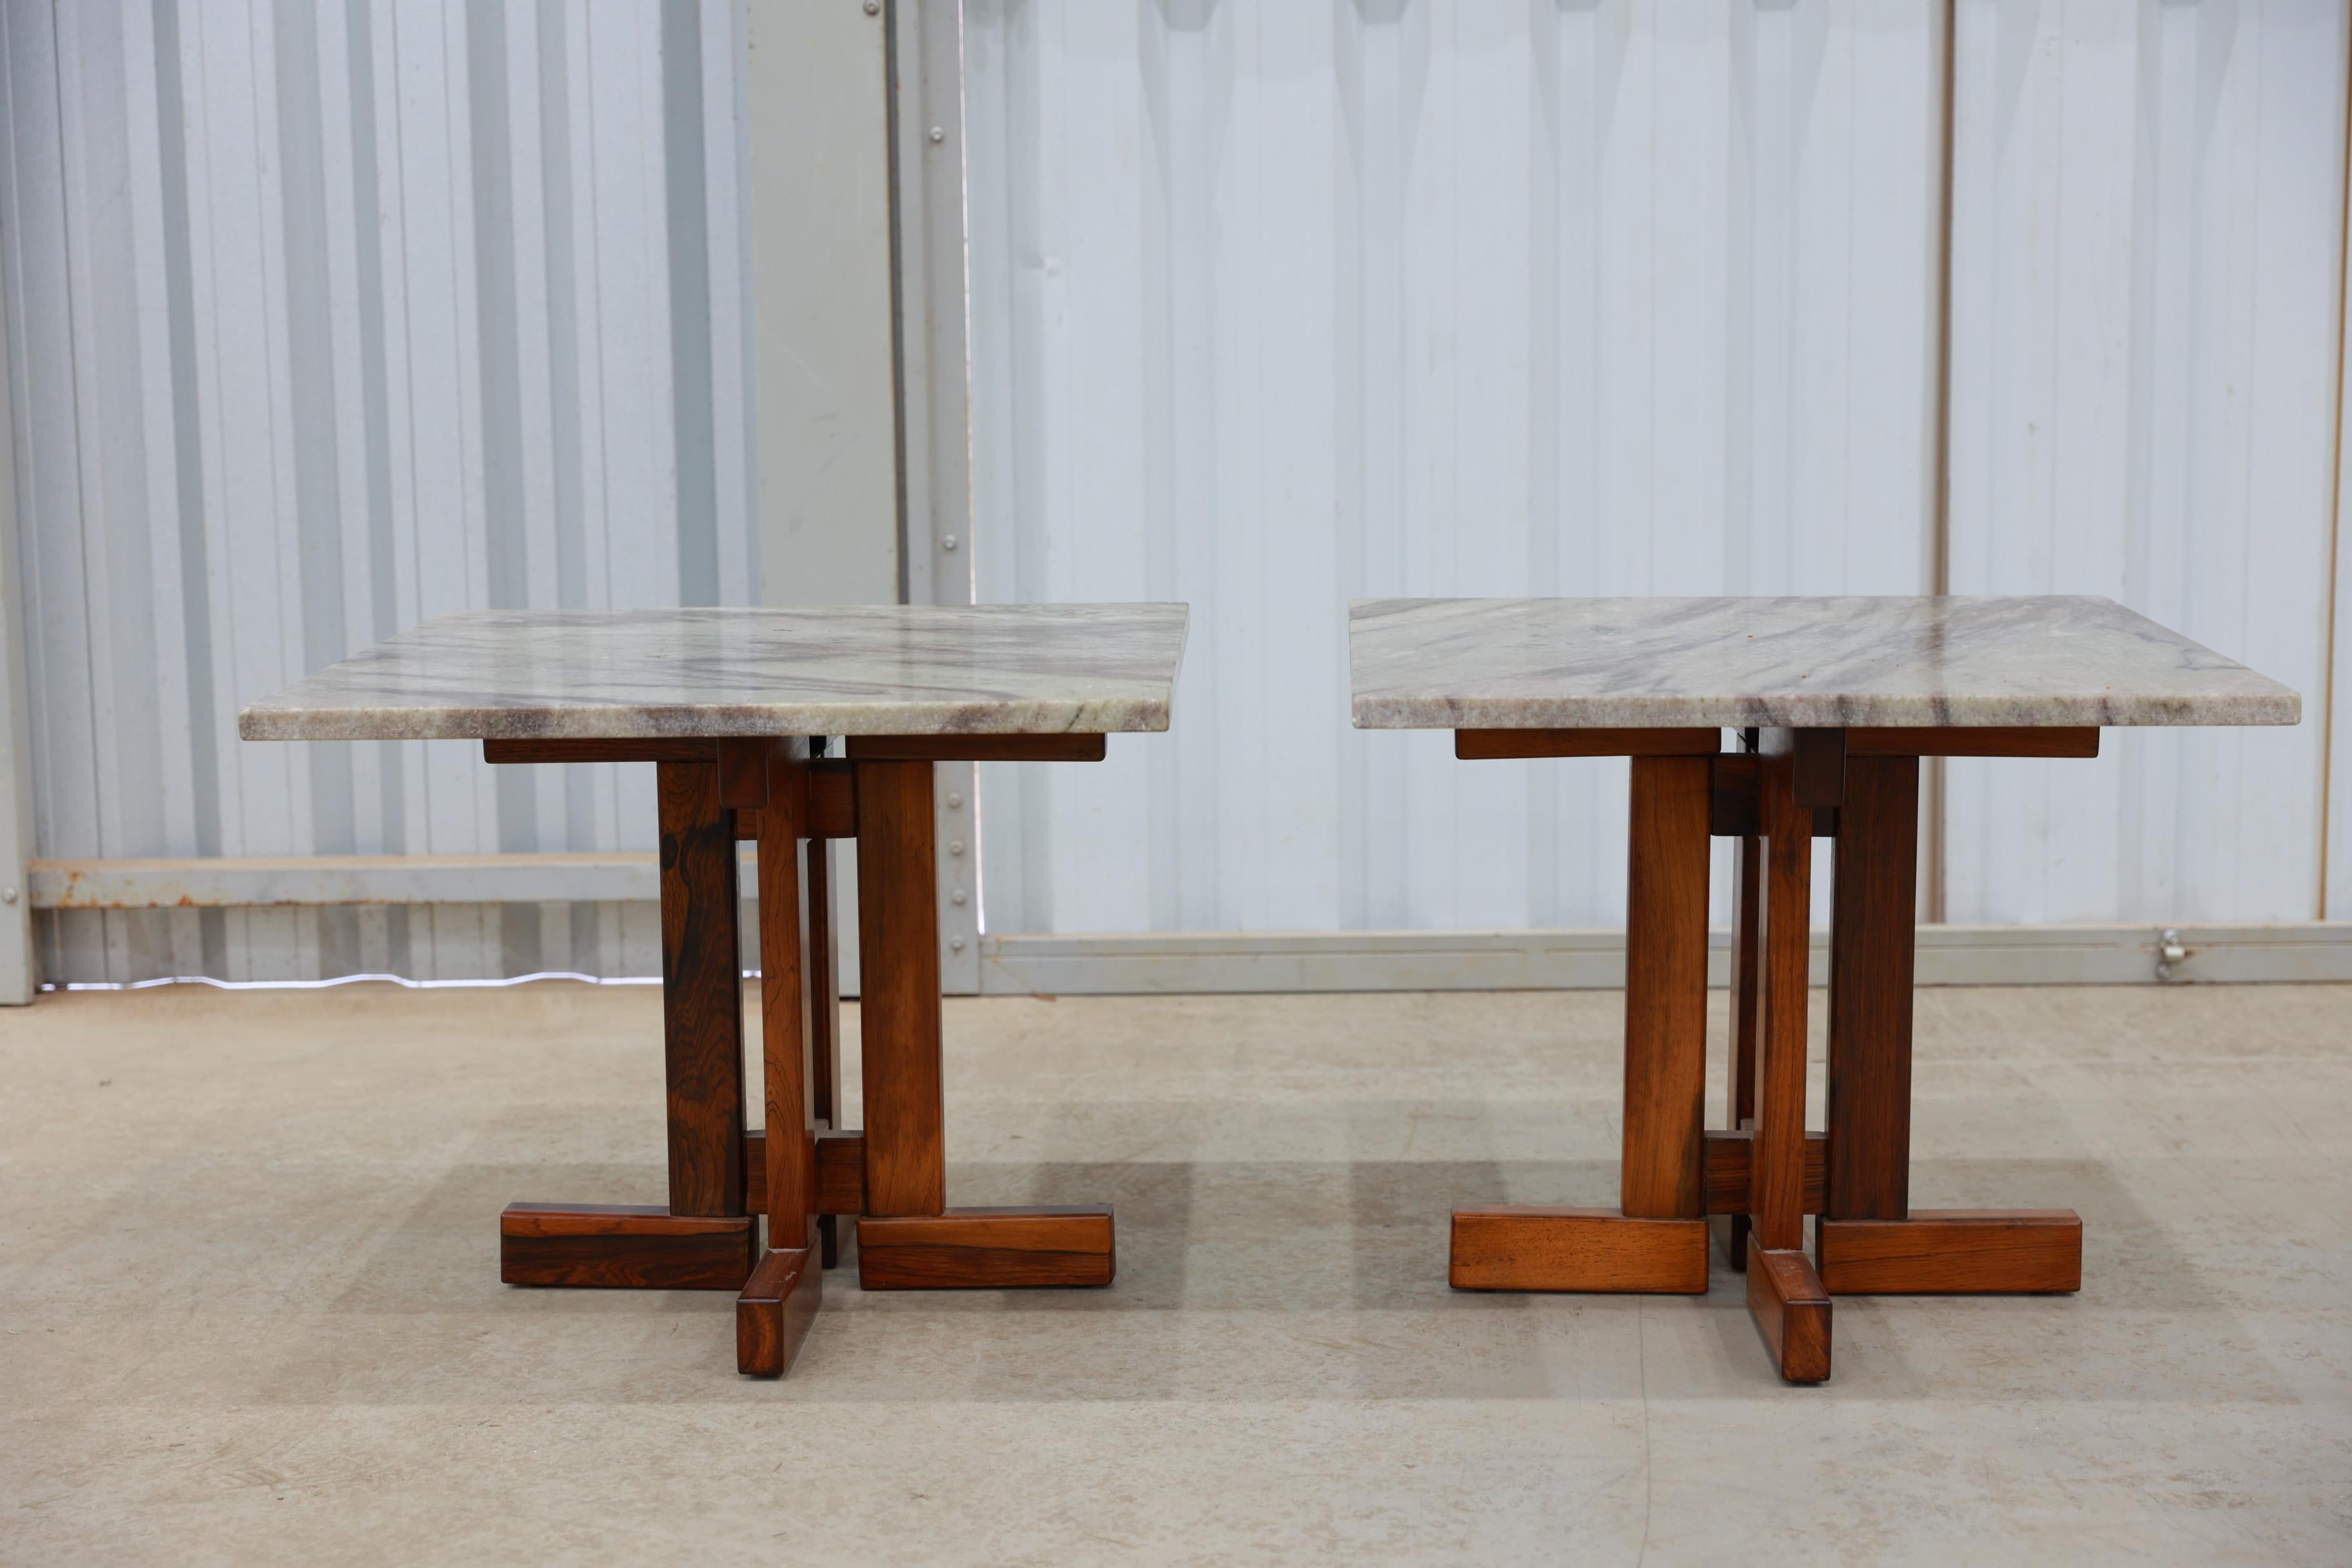 Brazilian Modern Pair of Side Tables in Rosewood and Granite by Celina, c. 1960 For Sale 10